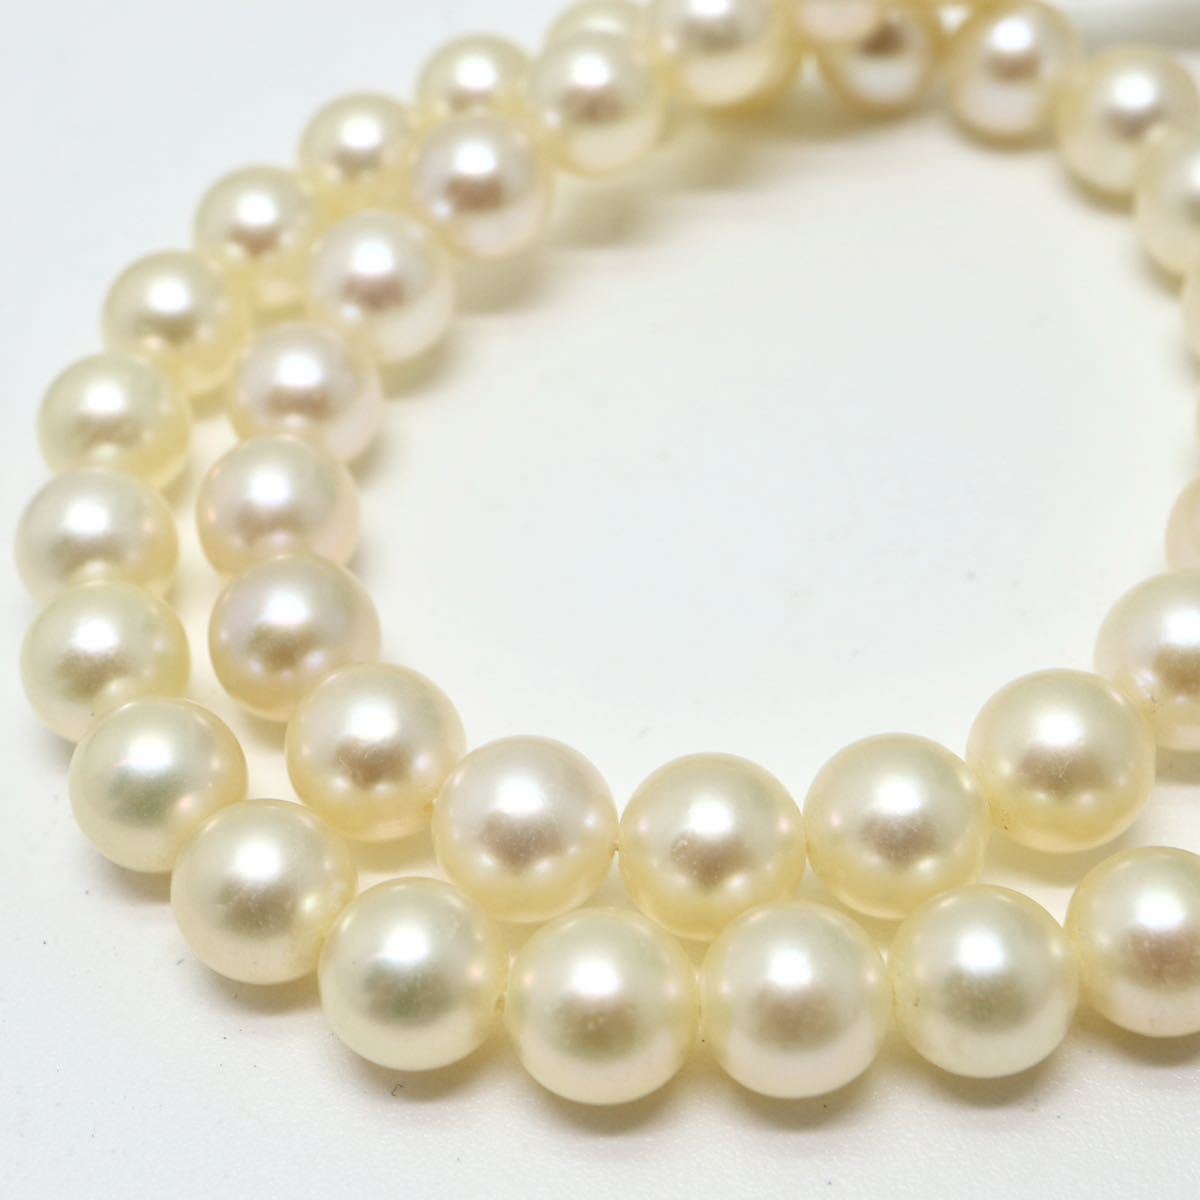 《K18アコヤ本真珠ネックレス》N 7.0-7.5mm珠 31.4g 41.5cm pearl necklace jewelry ジュエリー EA0/EB0_画像4